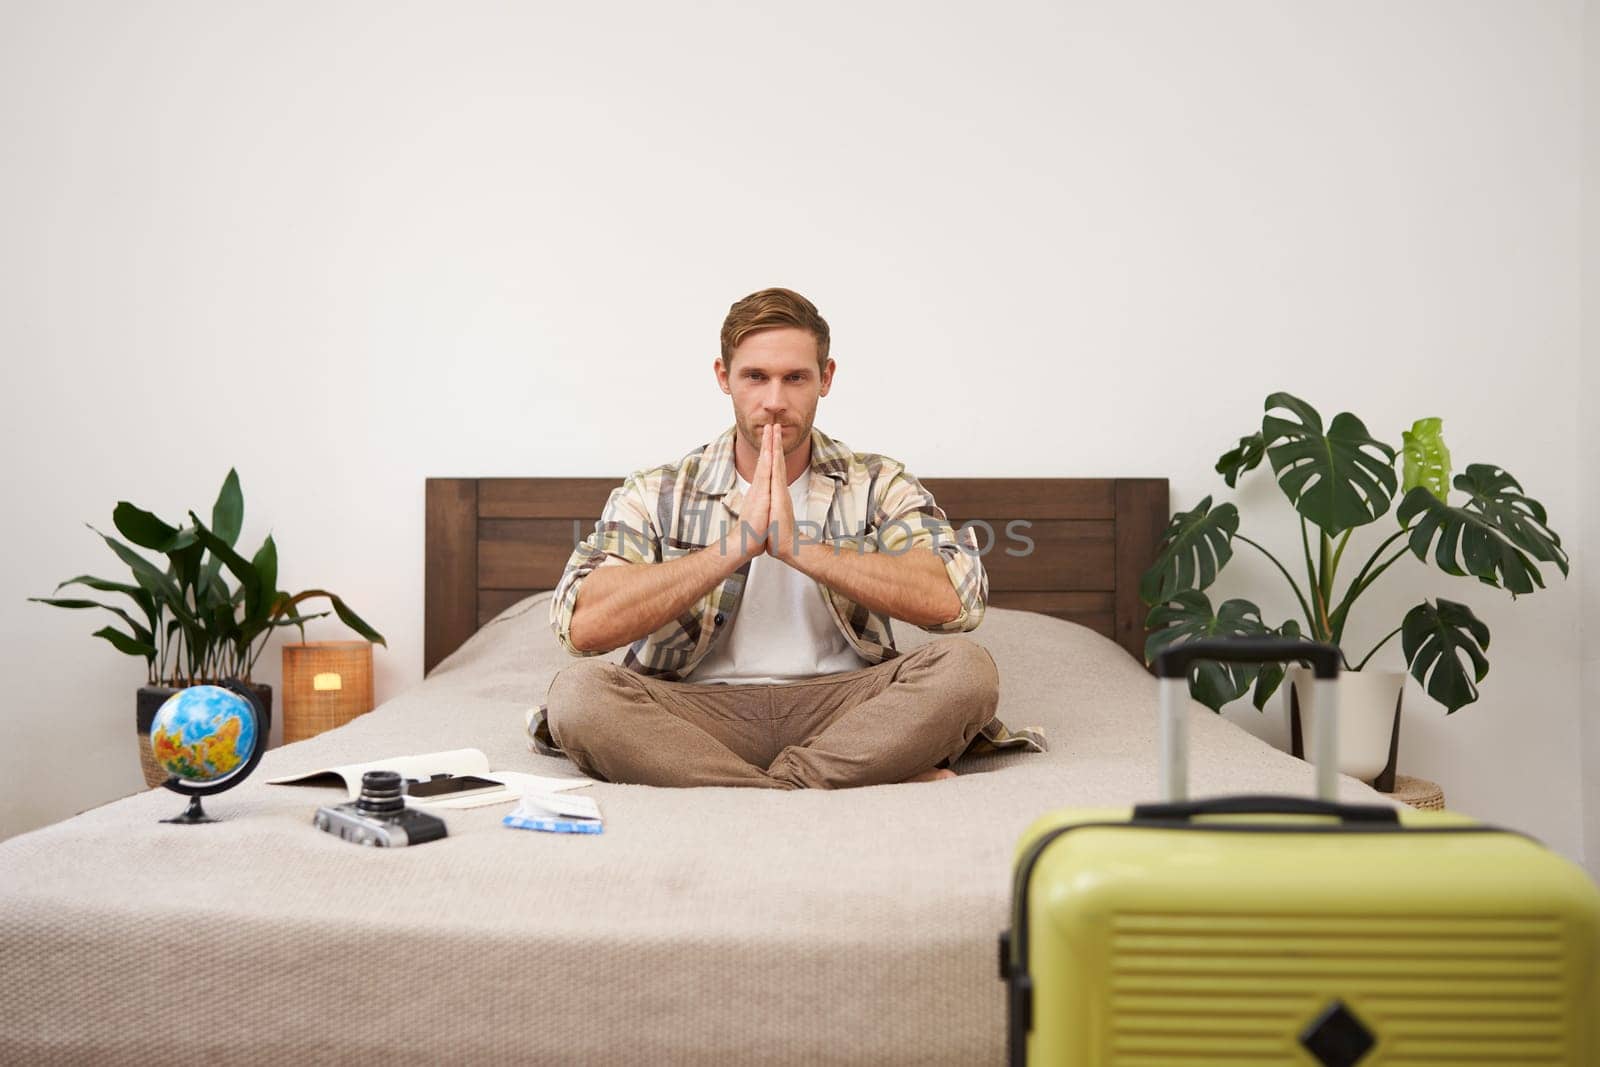 Portrait of traveller practice yoga, young man meditating before going on vacation, sitting with suitcase, globe and camera on bed in bedroom, relaxing, looking for peaceful holiday.